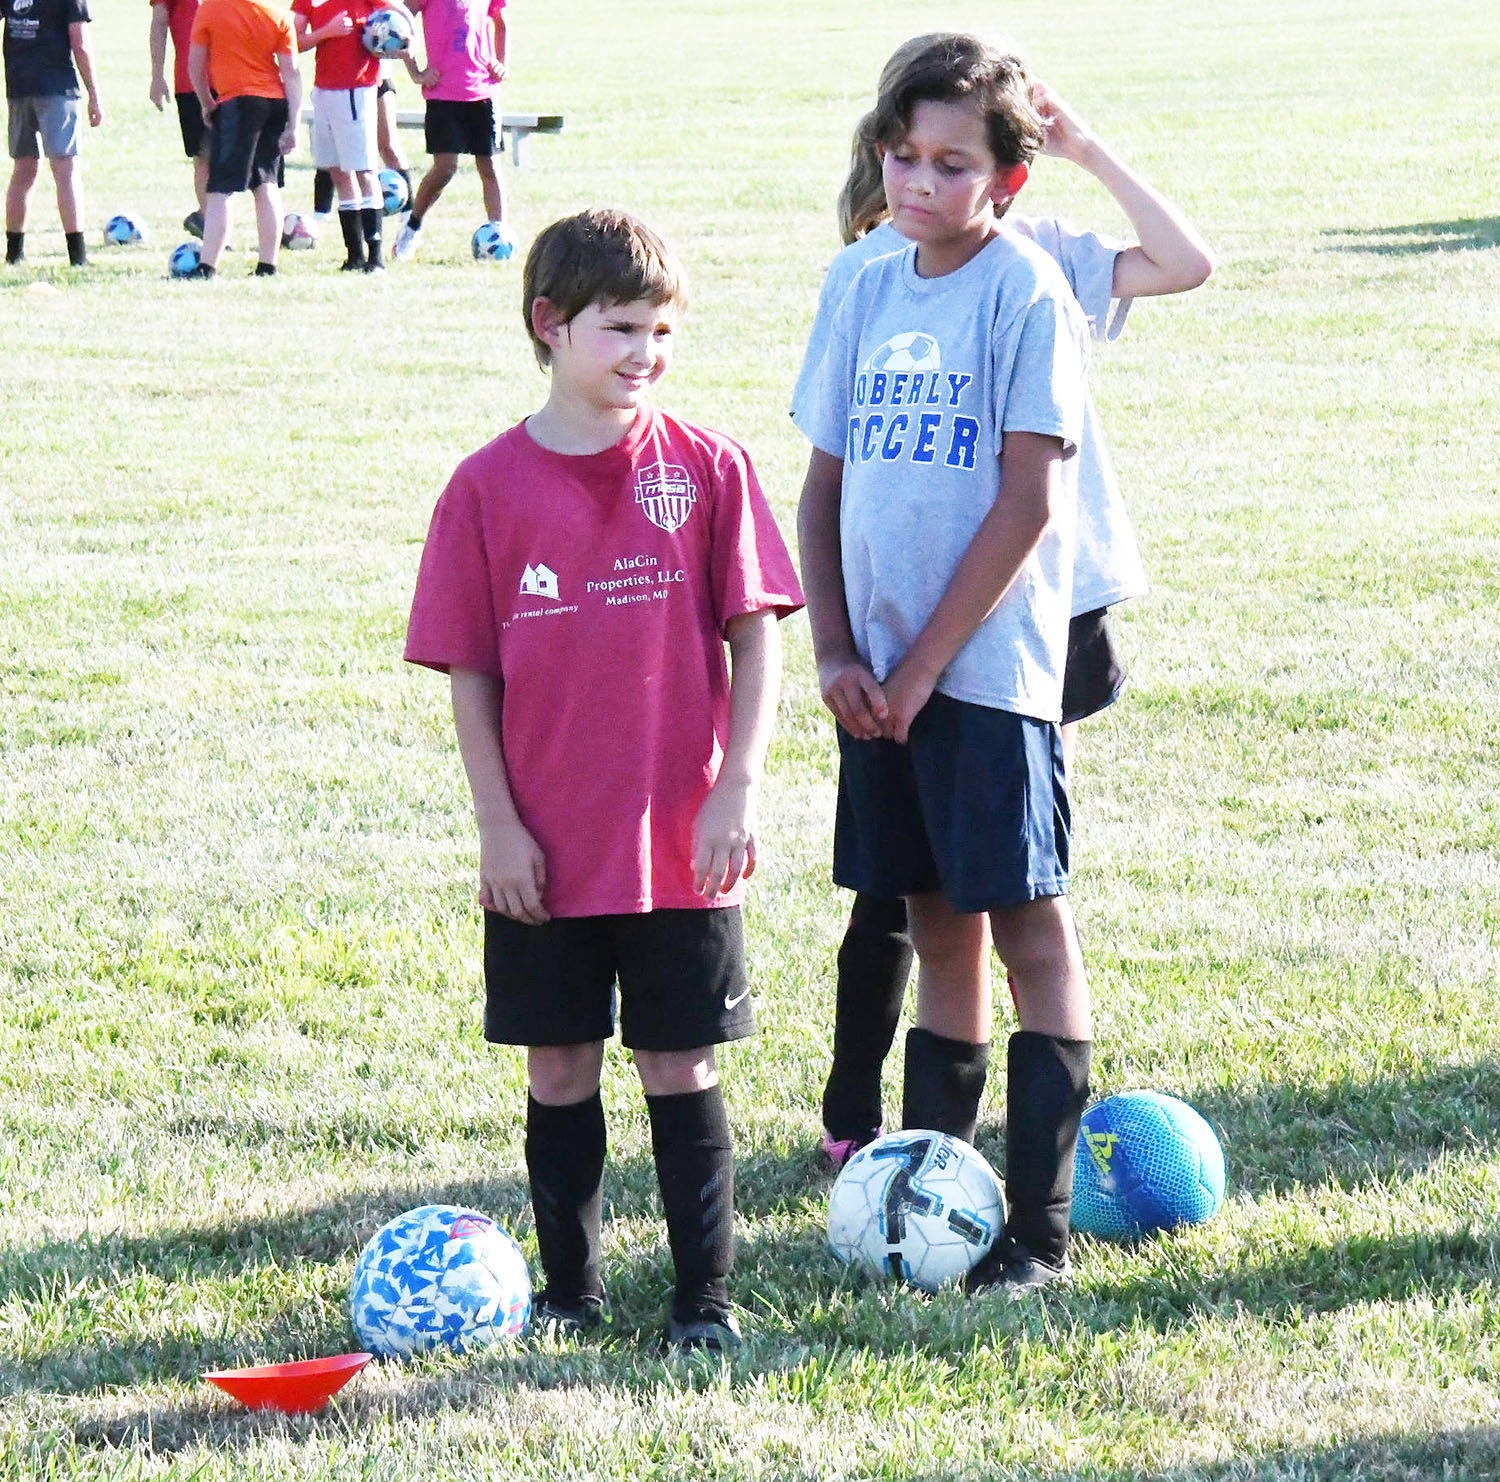 Soccer players prepare for a shooting drill. Youth worked on both shooting power and shooting accuracy.